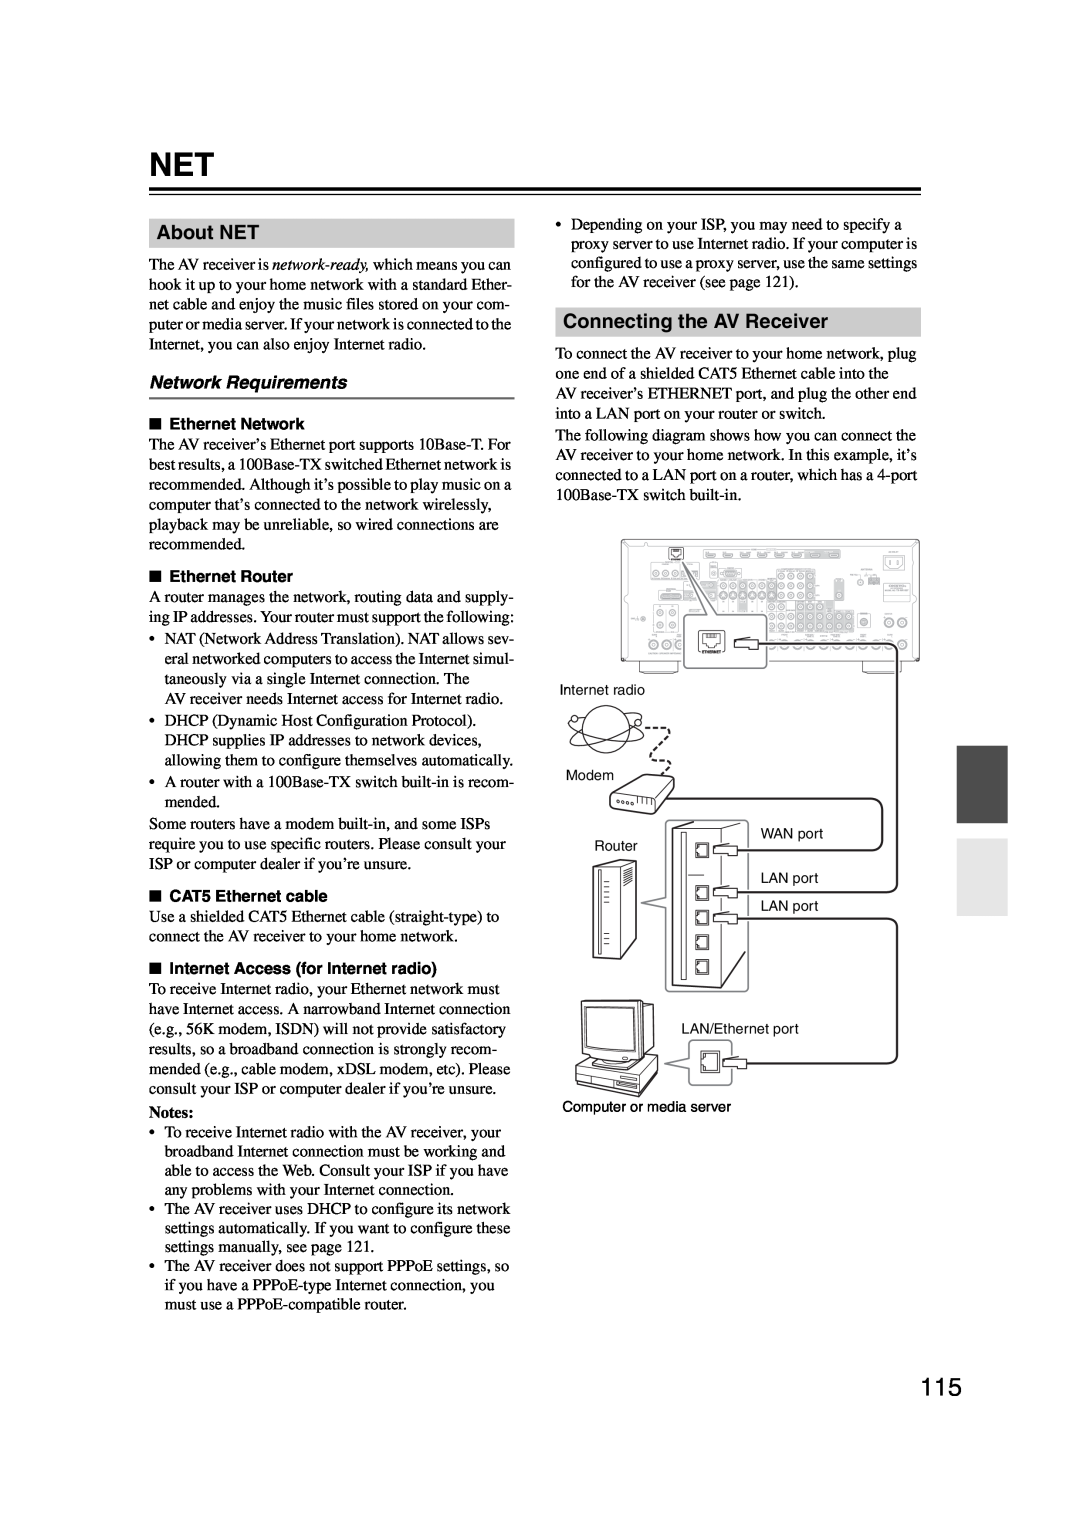 Onkyo TX-NR1007 instruction manual About NET, Connecting the AV Receiver, Network Requirements, Notes 